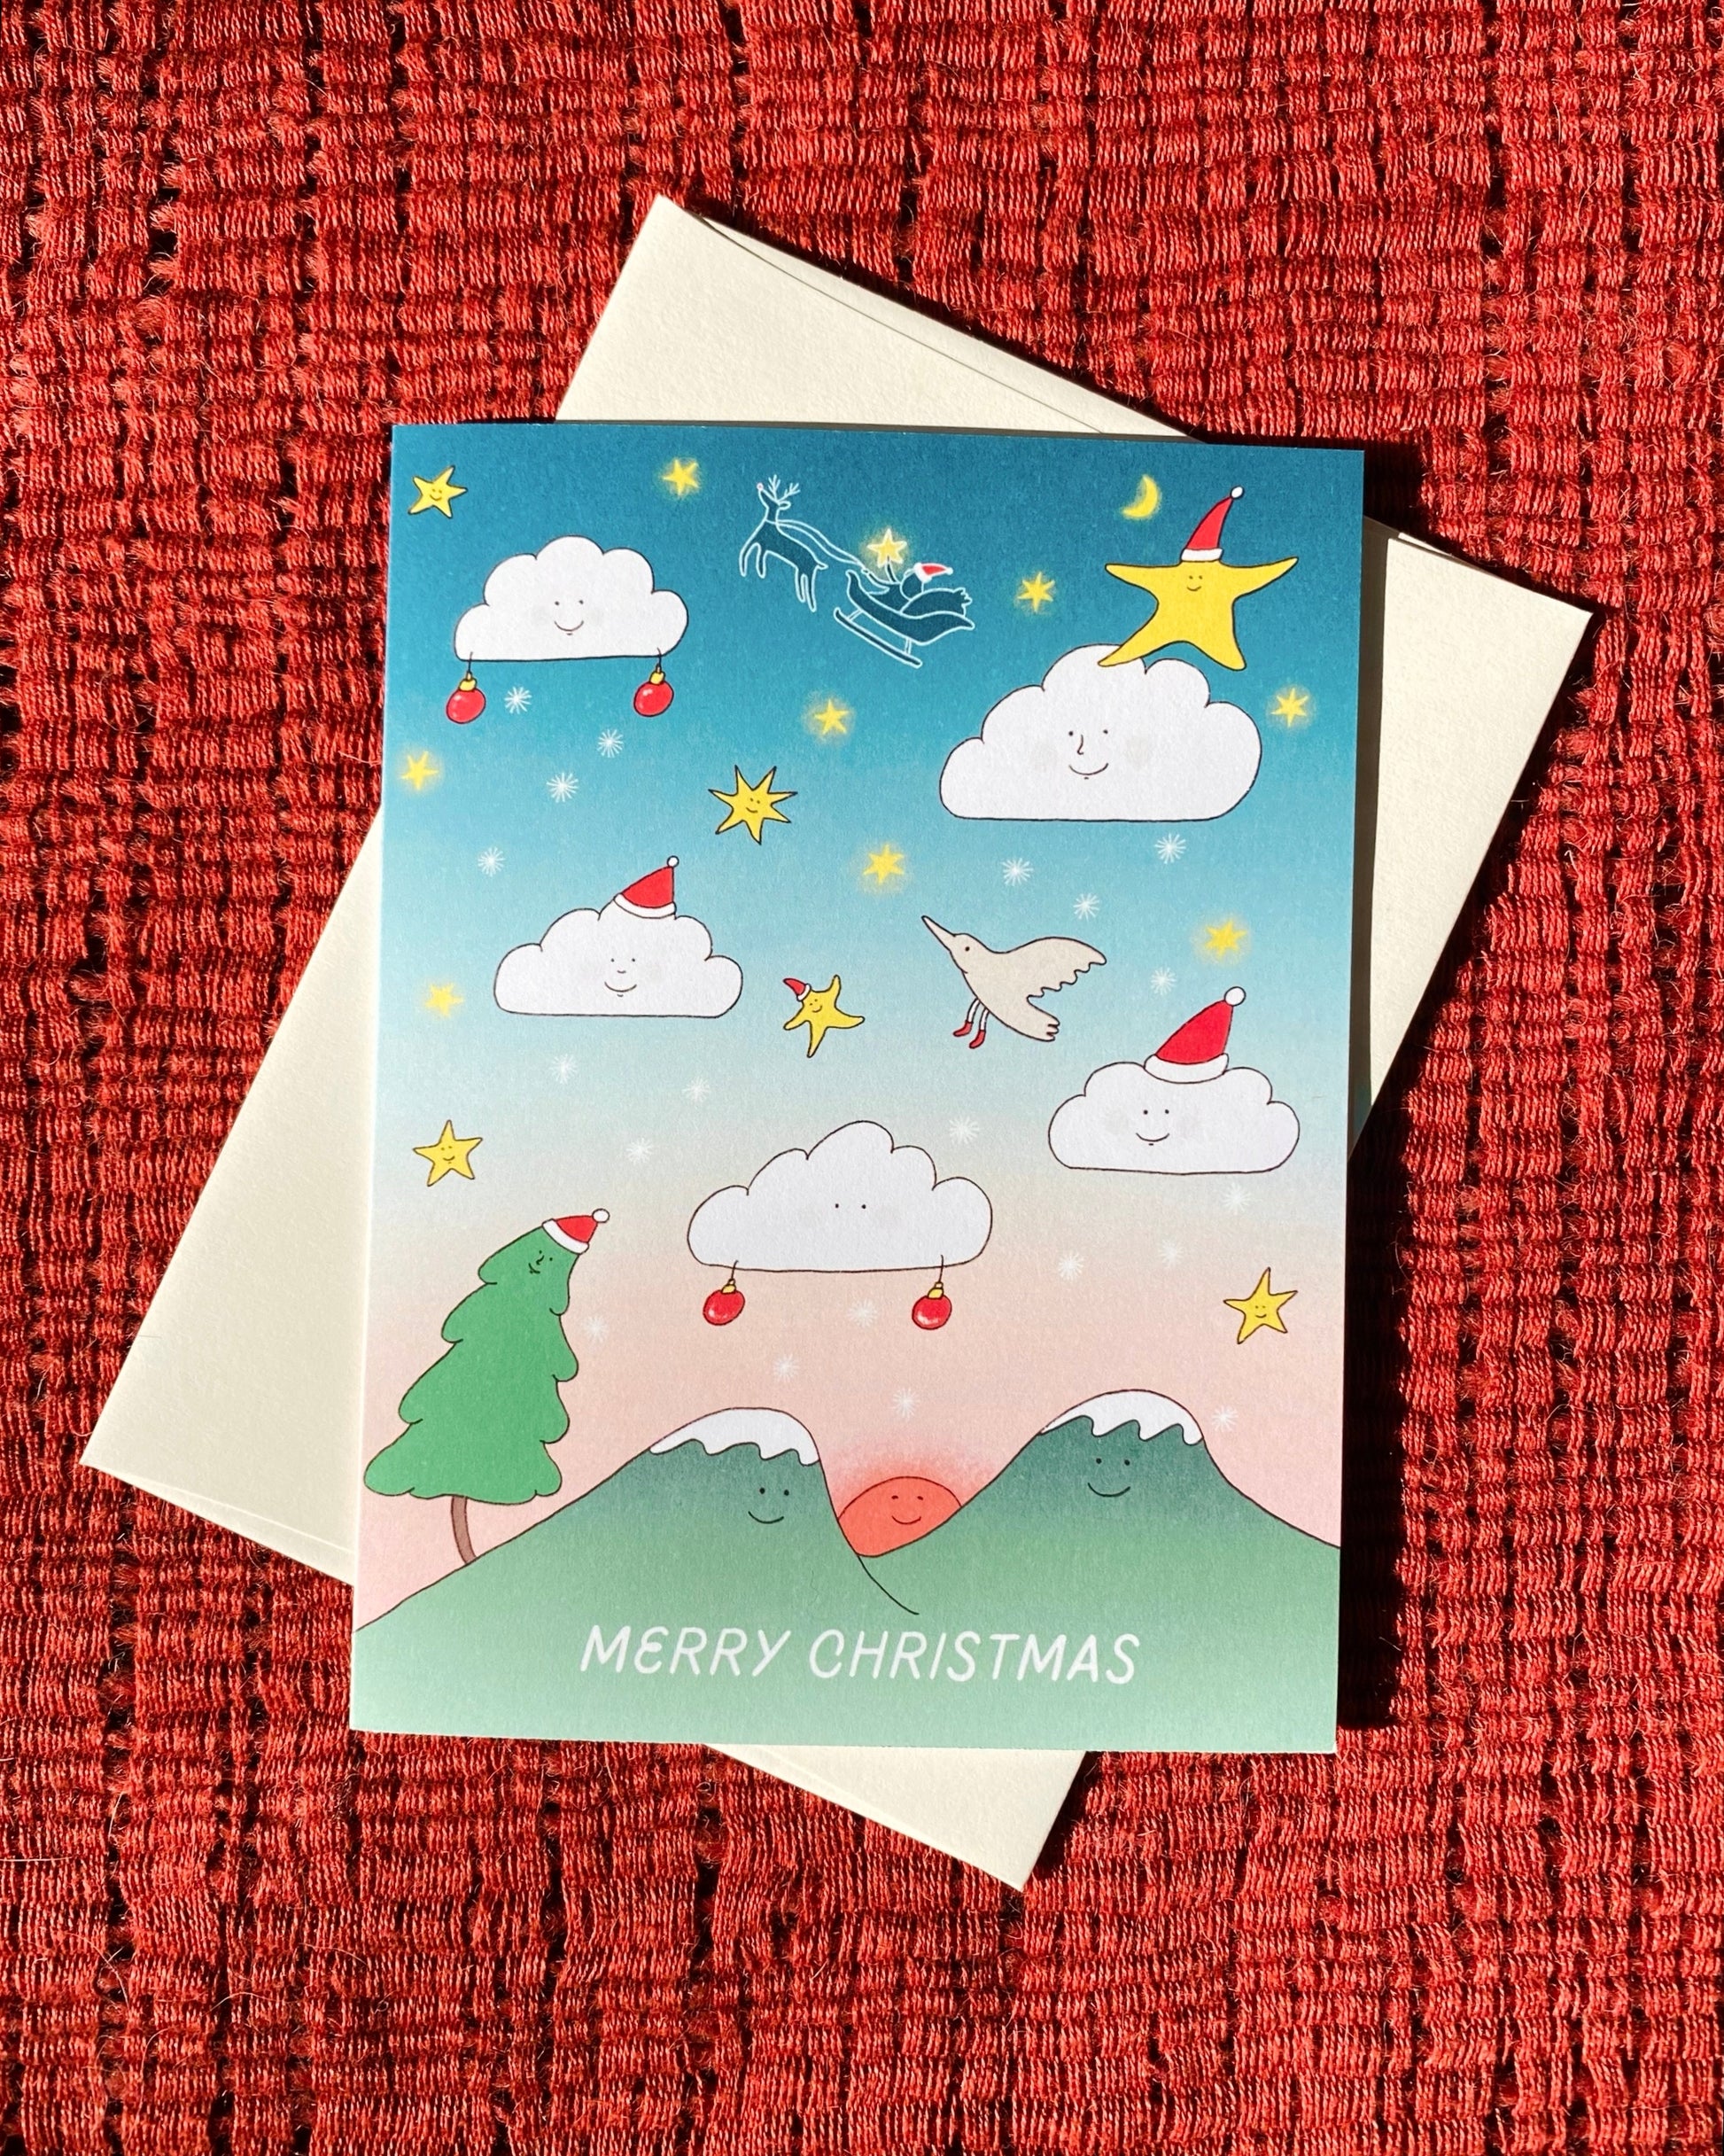 Cute Christmas Card with clouds with faces floating in the gradient sky along with stars, snow flakes above the mountains